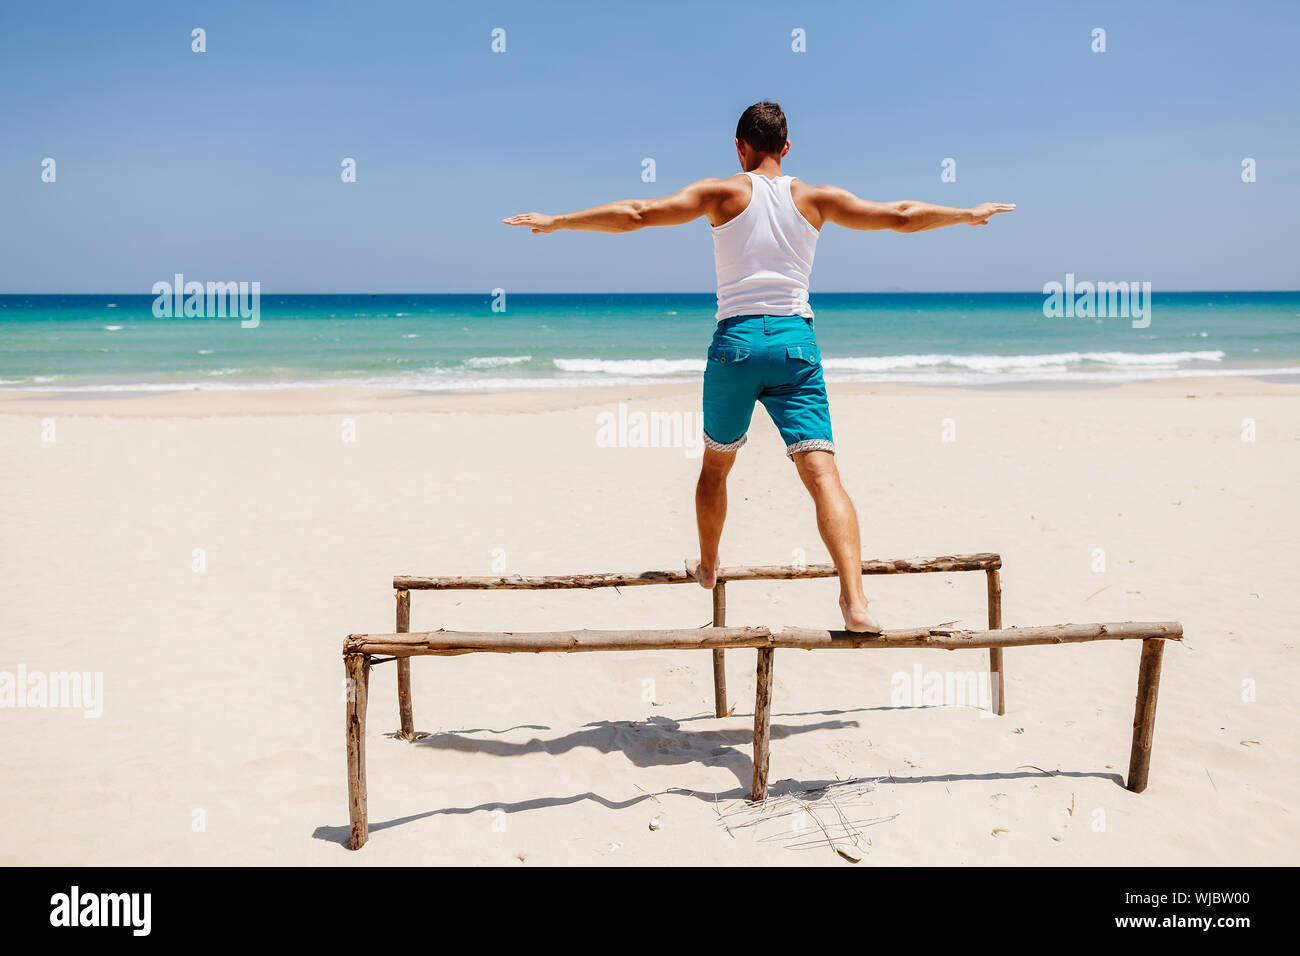 Man With Arms Outstretched Balancing On Wooden Structure At Beach During Sunny Day Stock Photo